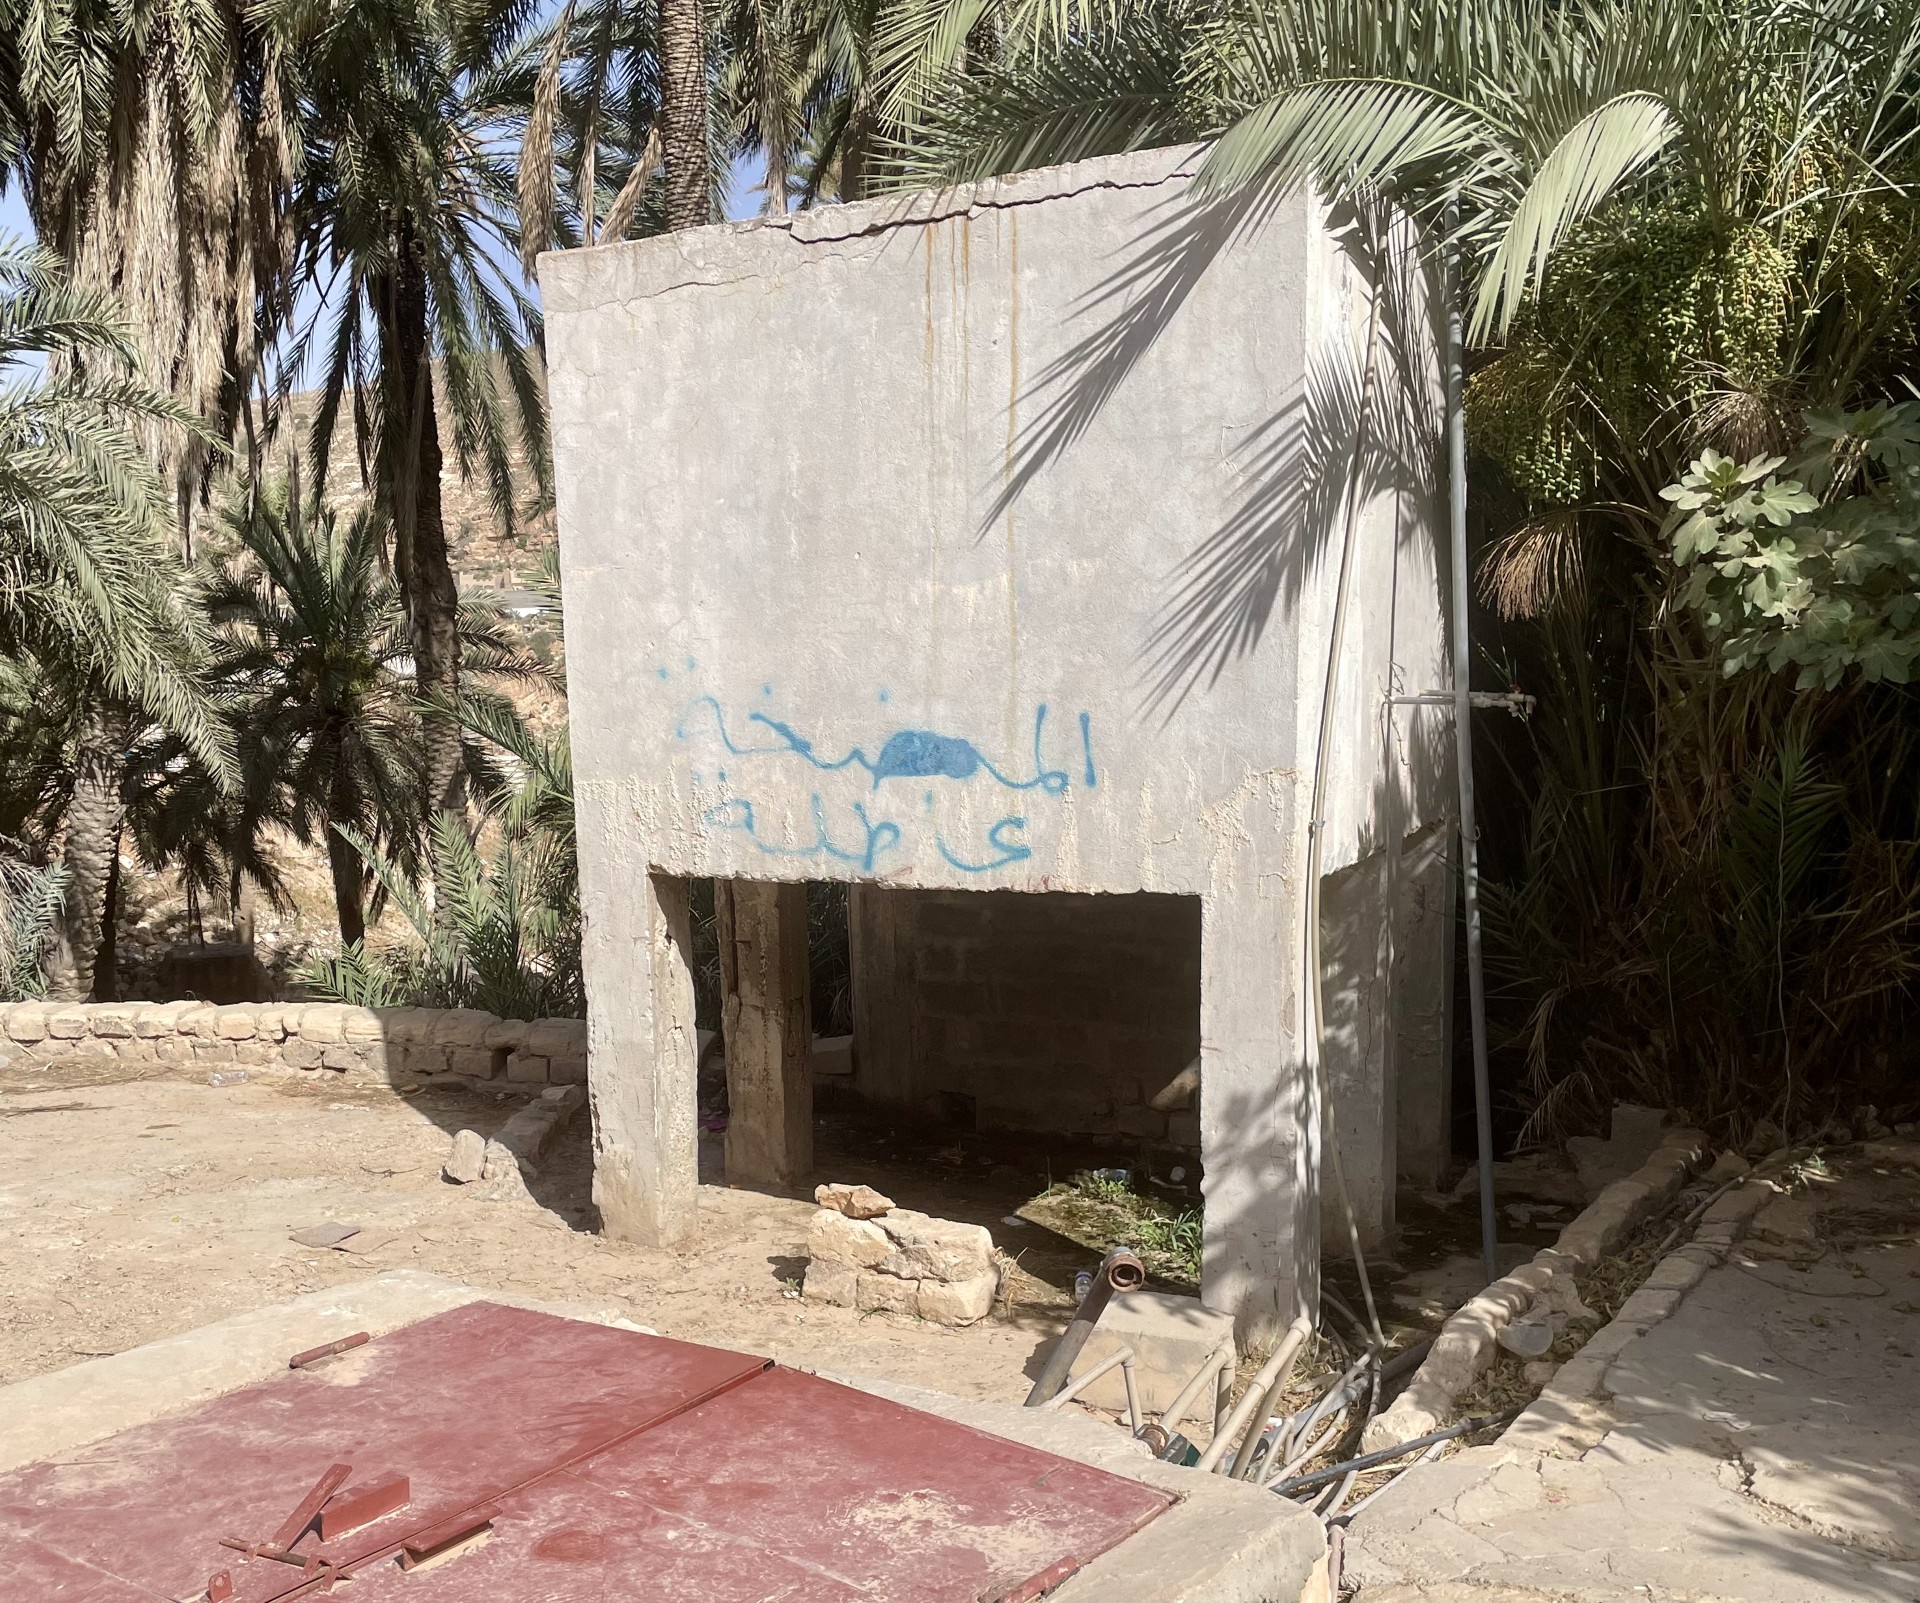 Concrete water well that looks like a big box. Surrounded by desert tree fronds